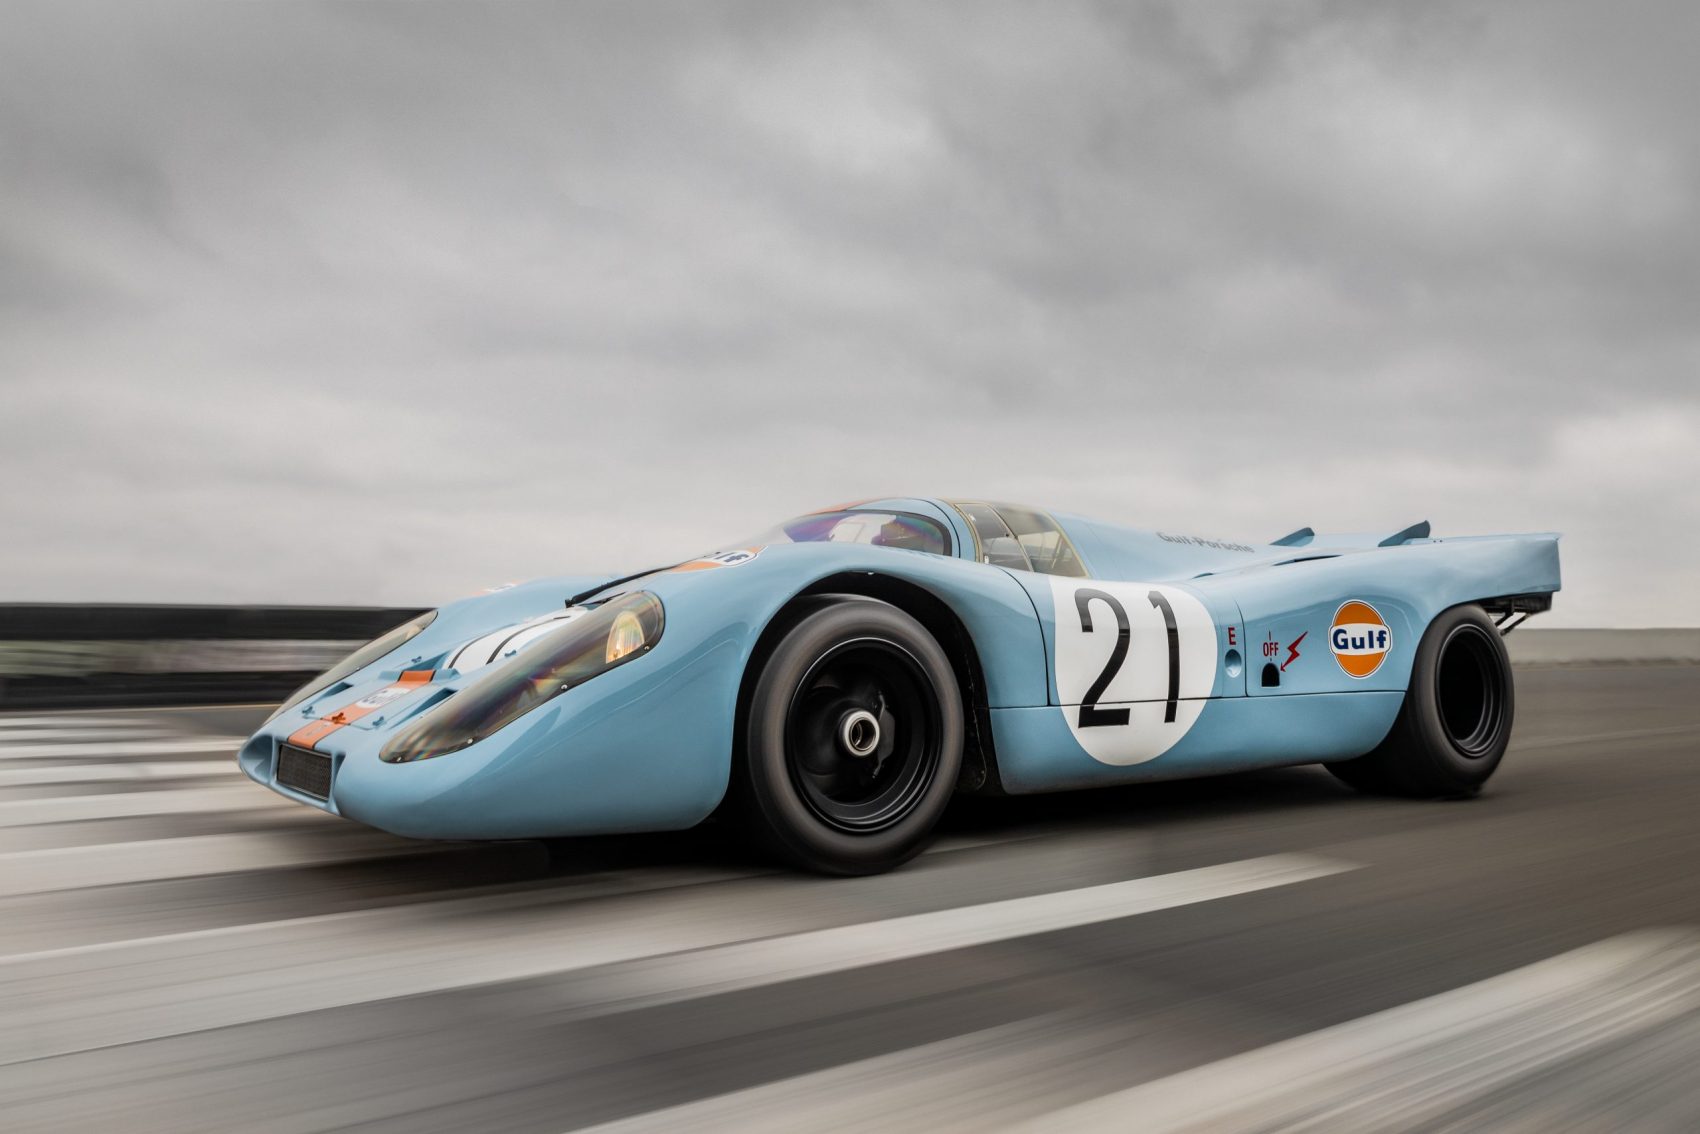 Driving the Porsche 917, fifty years on